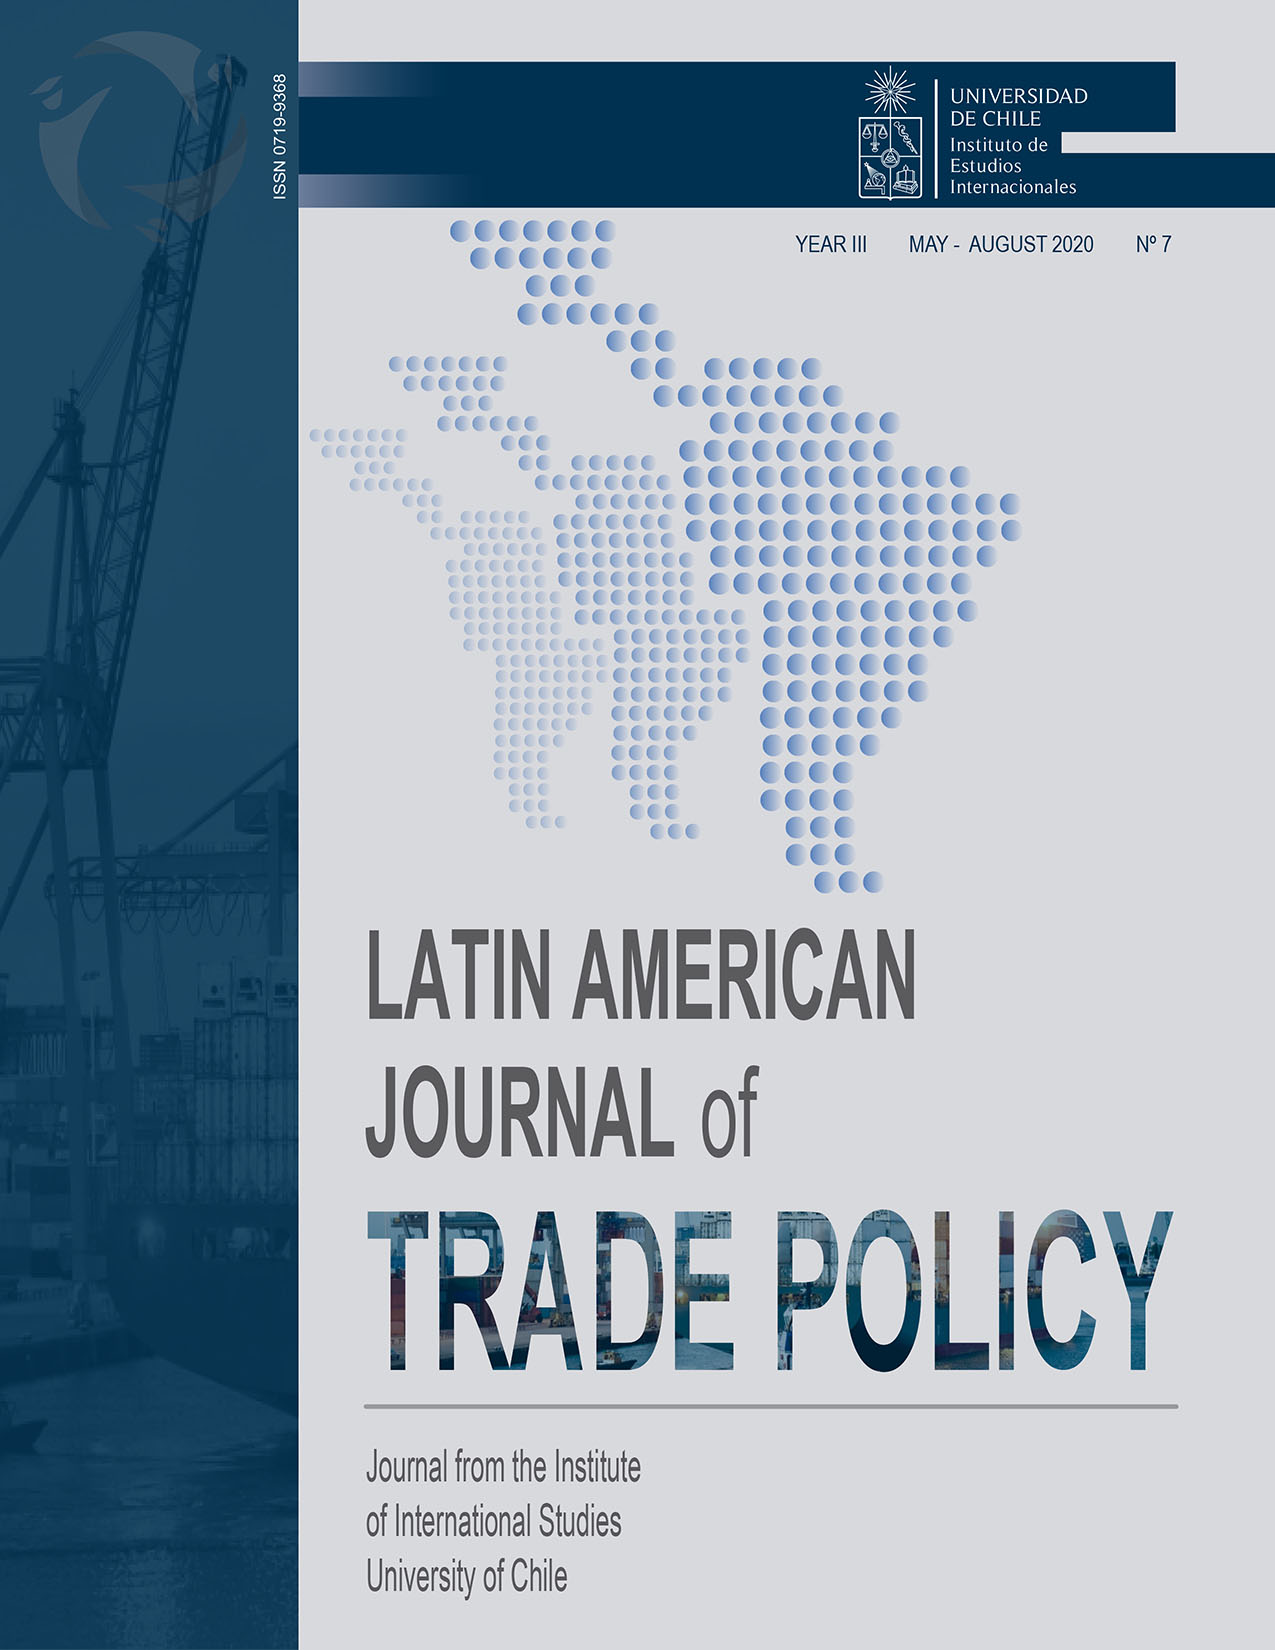 											Ver Vol. 3 Núm. 7 (2020): Latin American Journal of Trade Policy
										